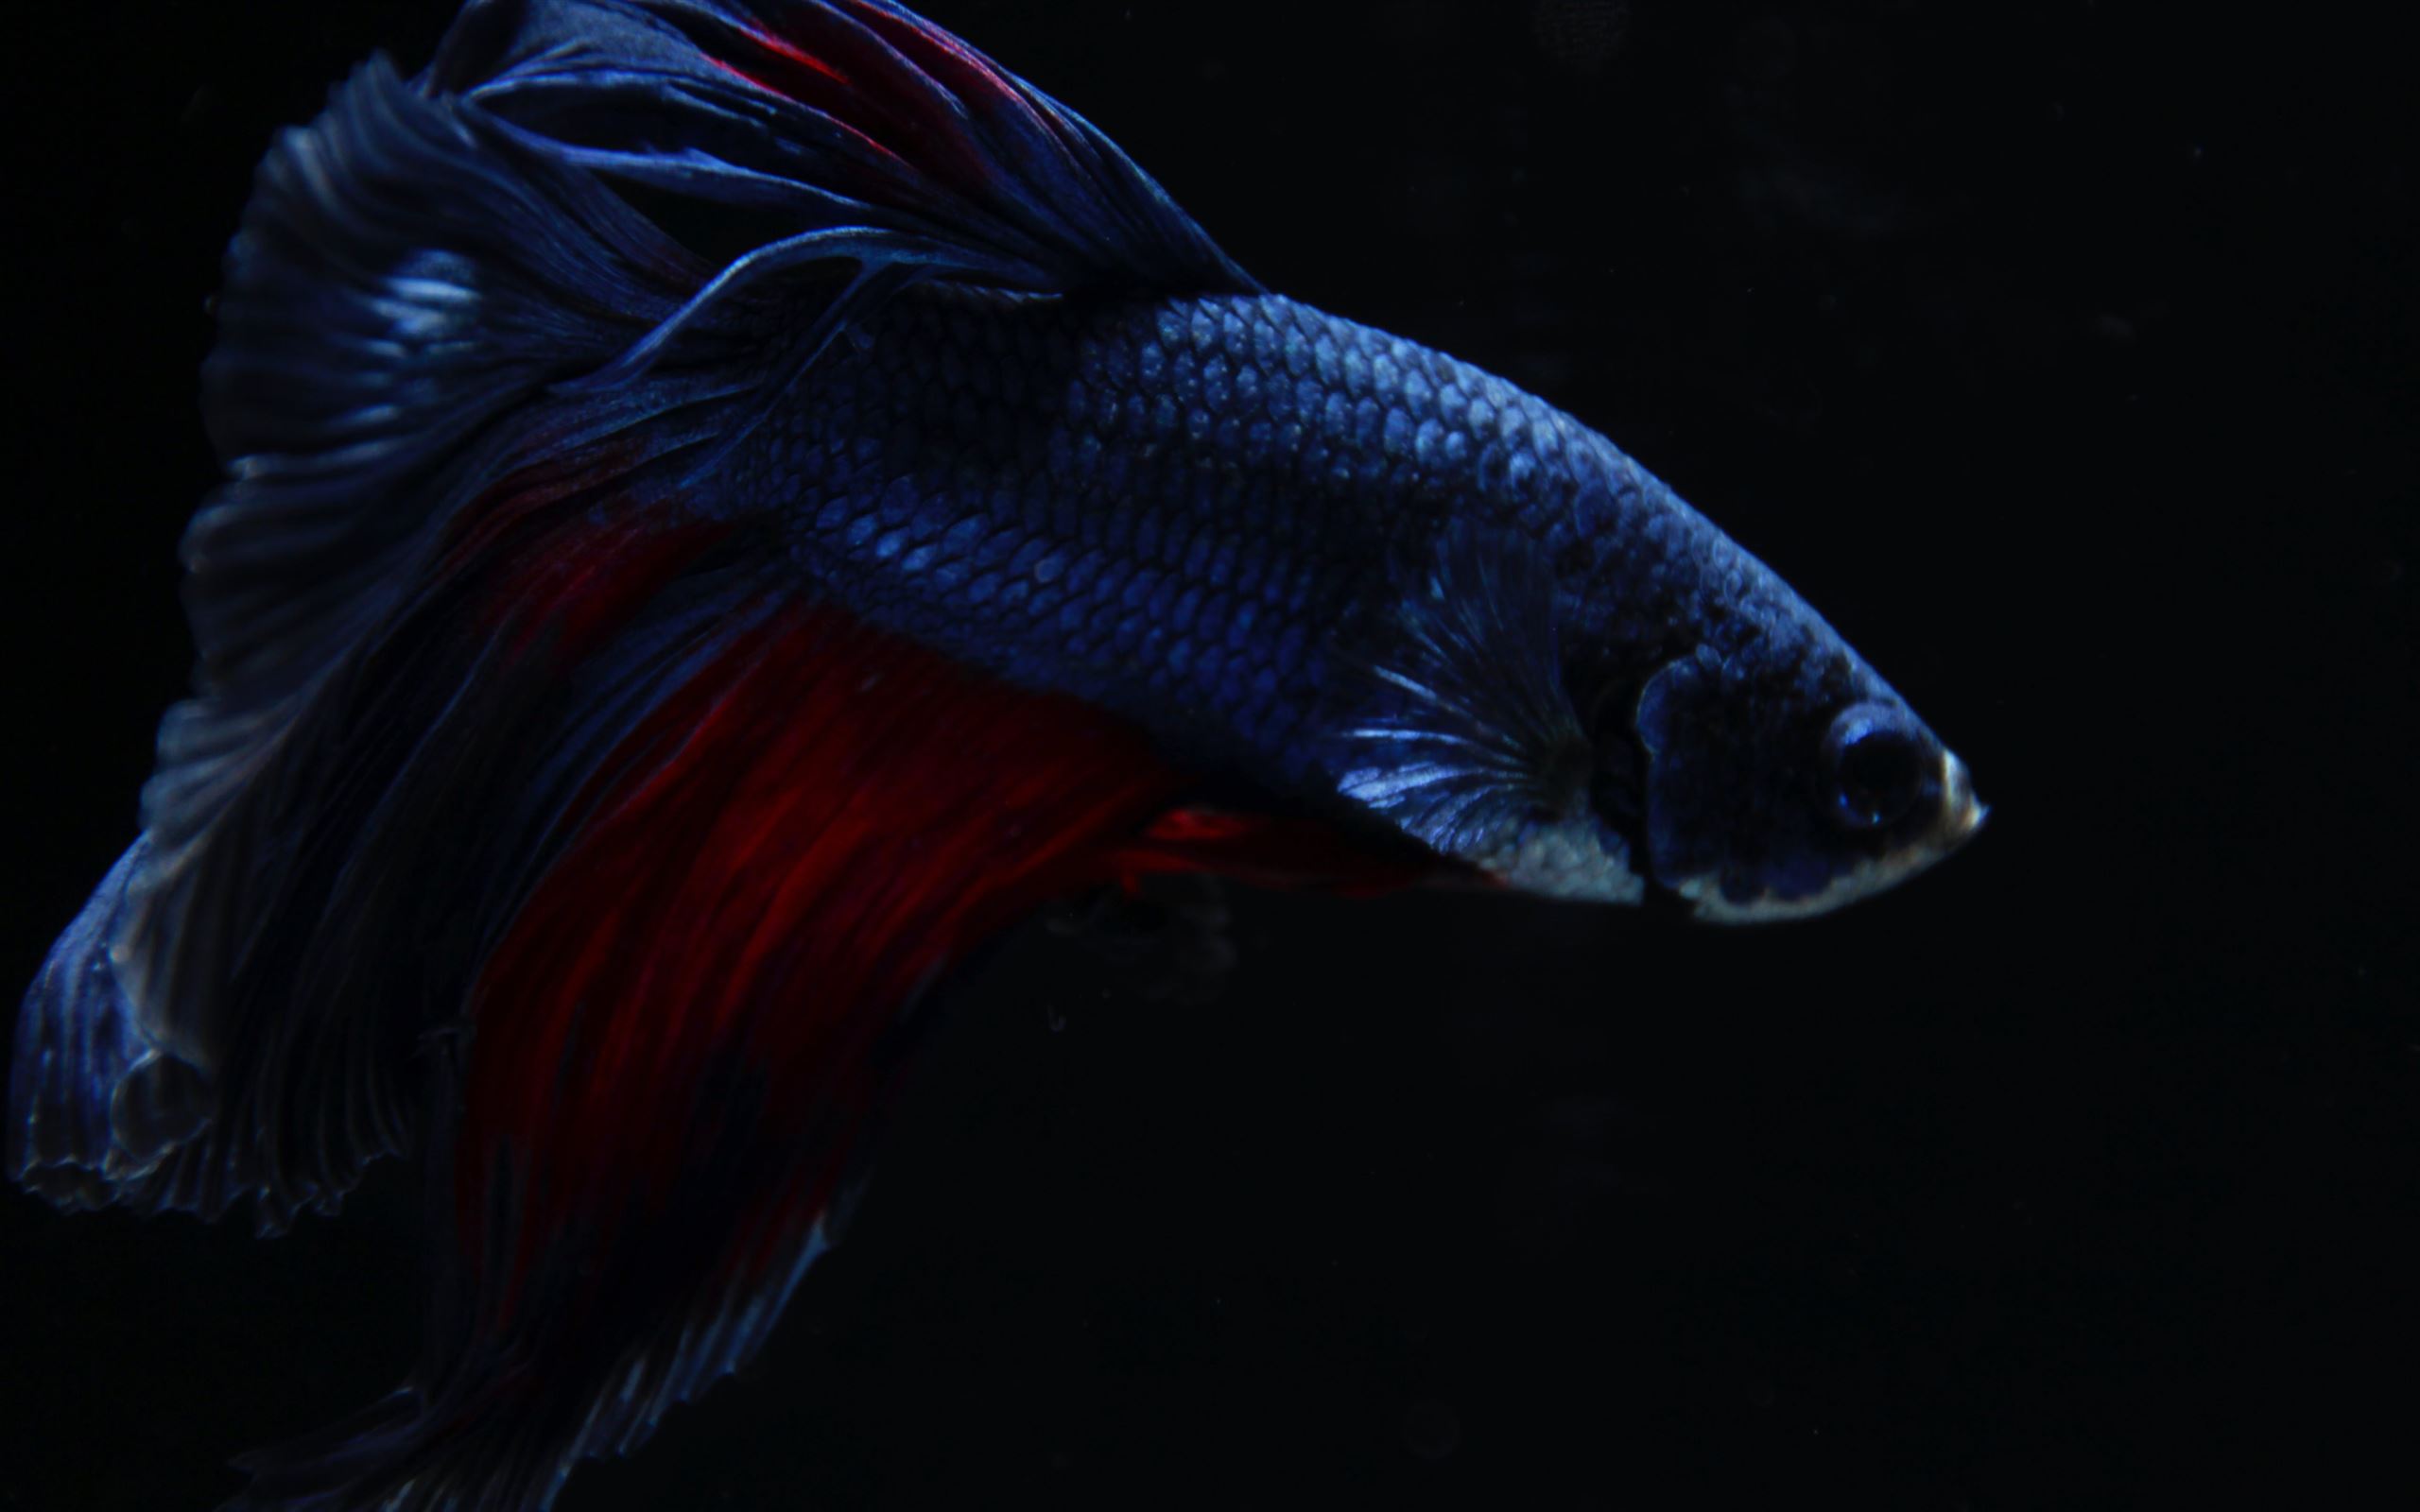 Portrait of a red and blue betta fish against a black background  action  exotic  Stock Photo  458465160